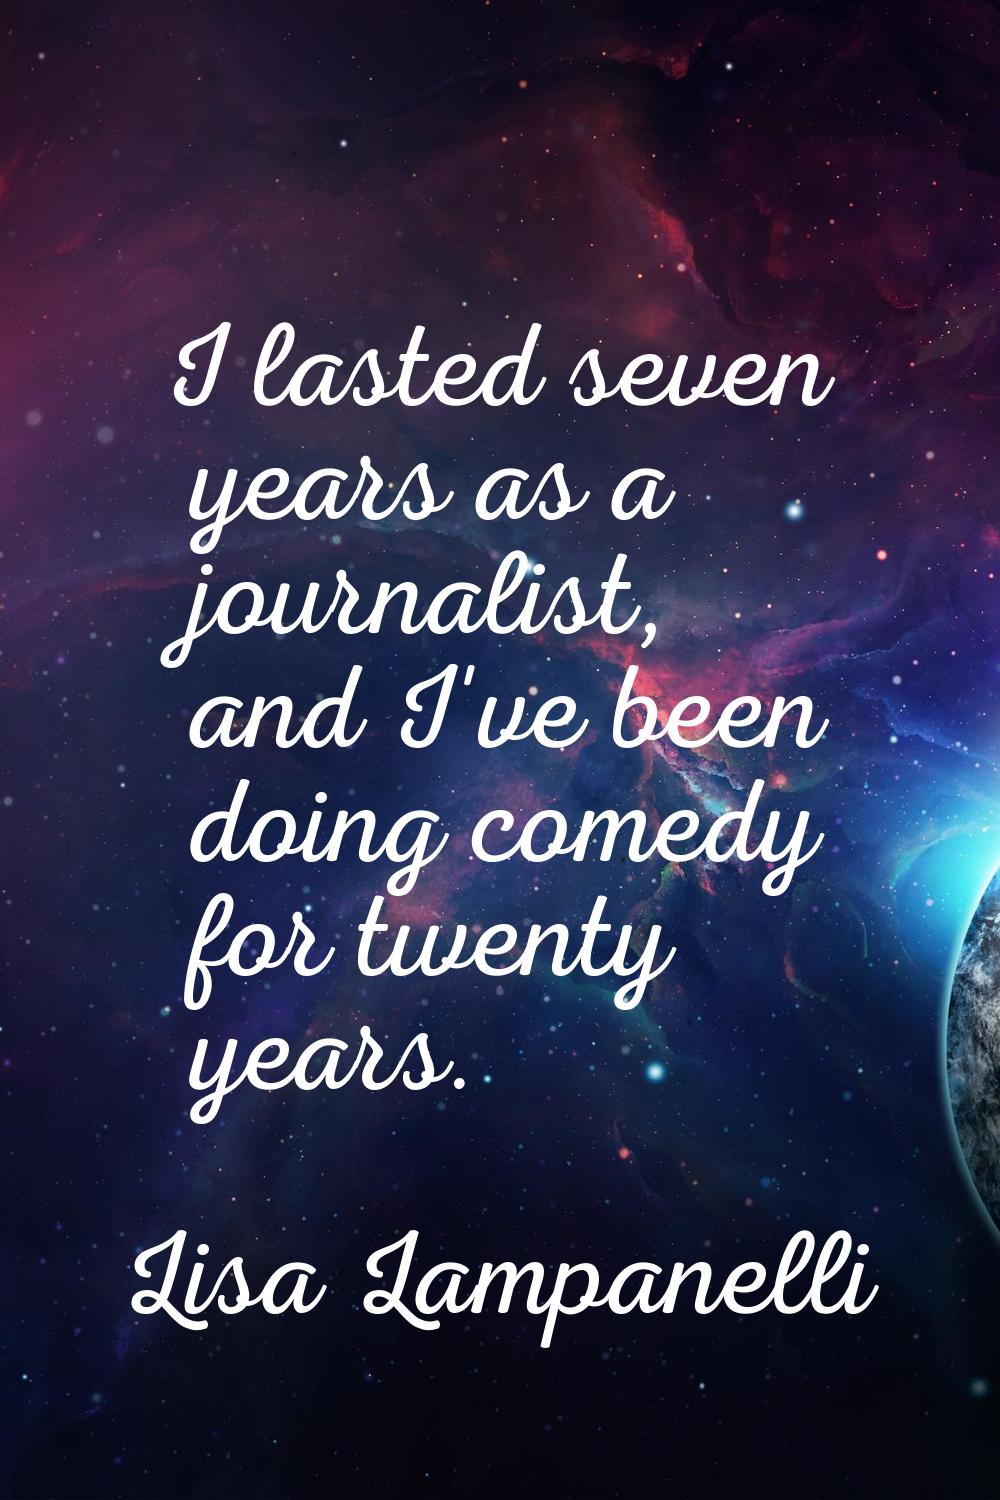 I lasted seven years as a journalist, and I've been doing comedy for twenty years.